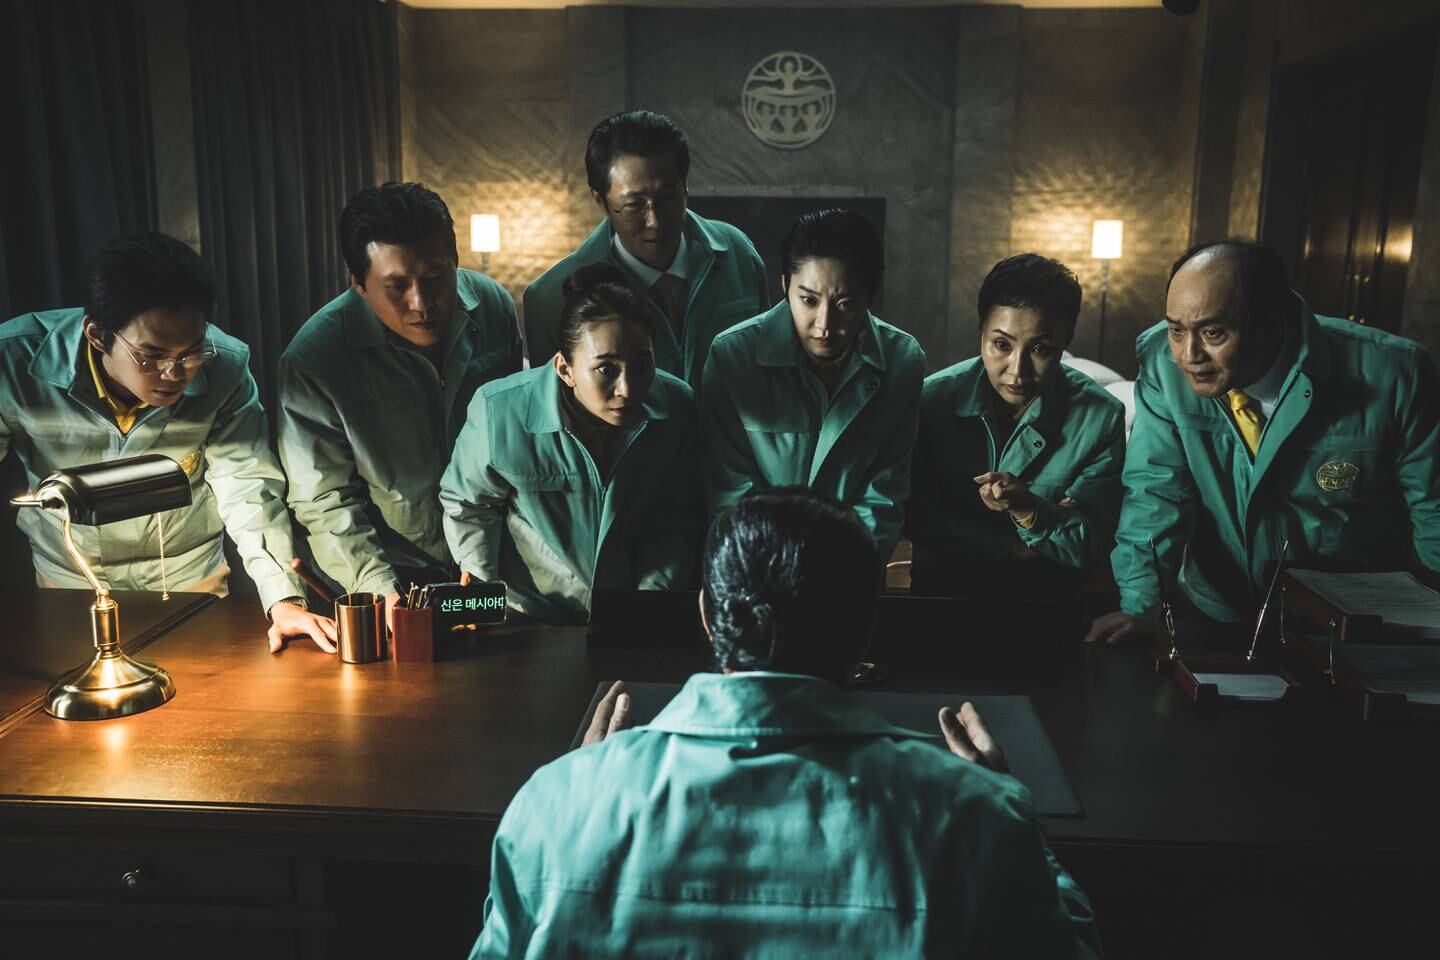 Religious group New Truth gain power and influence through their charismatic leader who claims to know the reason behind the supernatural occurrences. Photo: Netflix